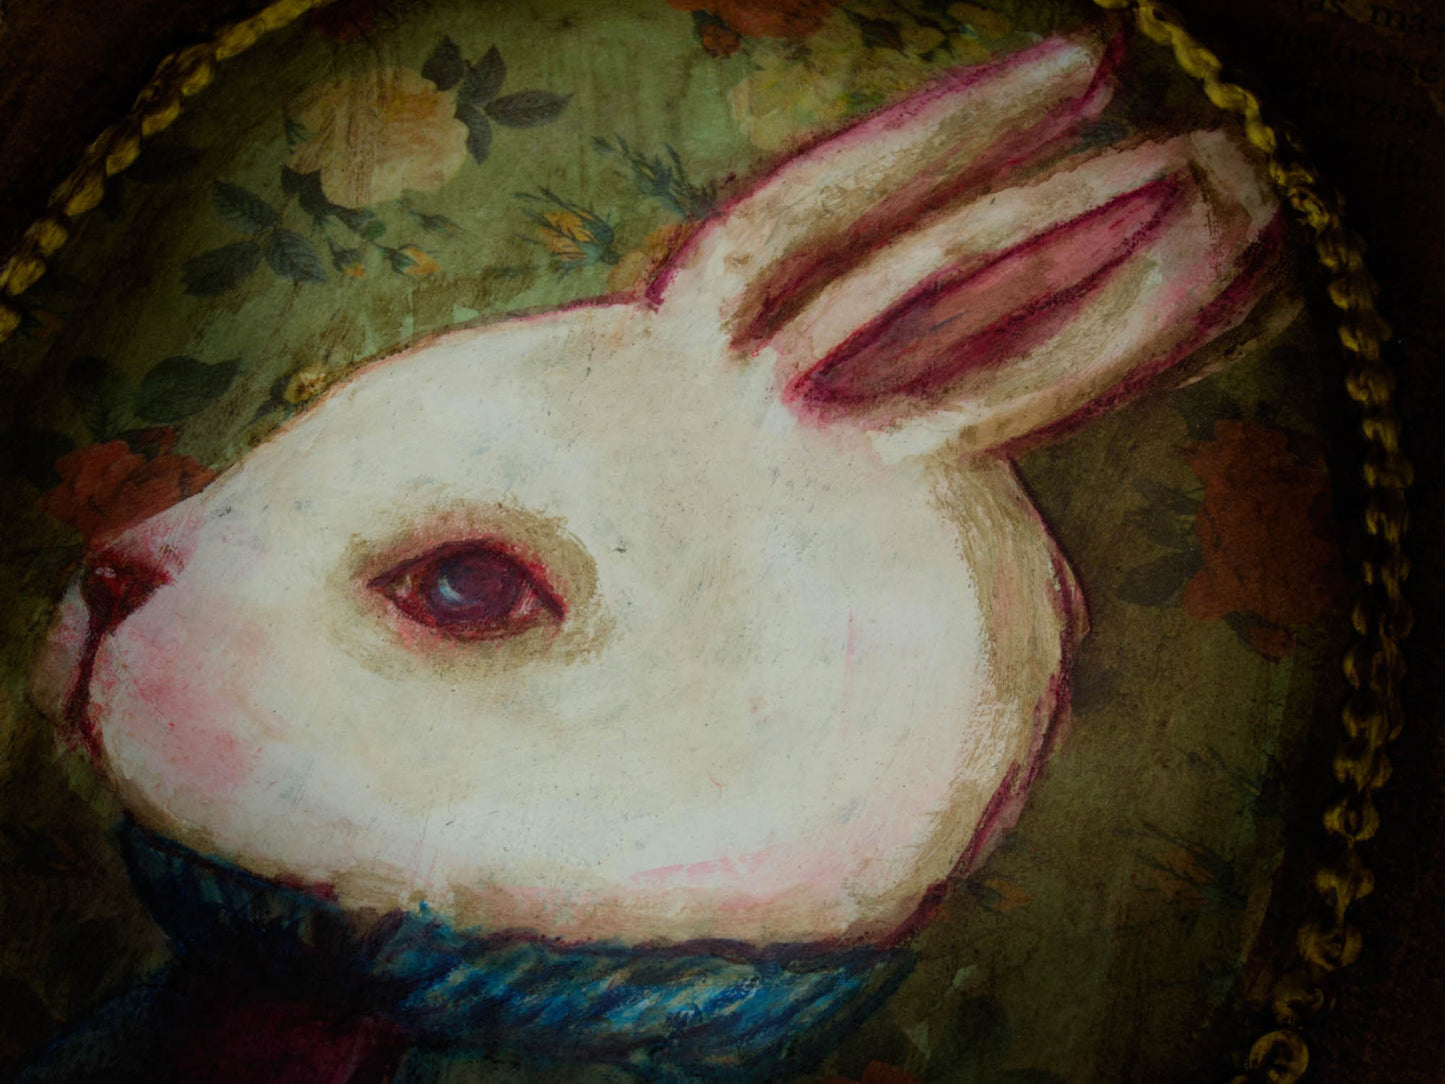 Alice's wild chase of a white rabbit took her on amazing adventures adventures in Wonderland, and here he is on this painting inspired by the beautiful book, created by Danita Art.